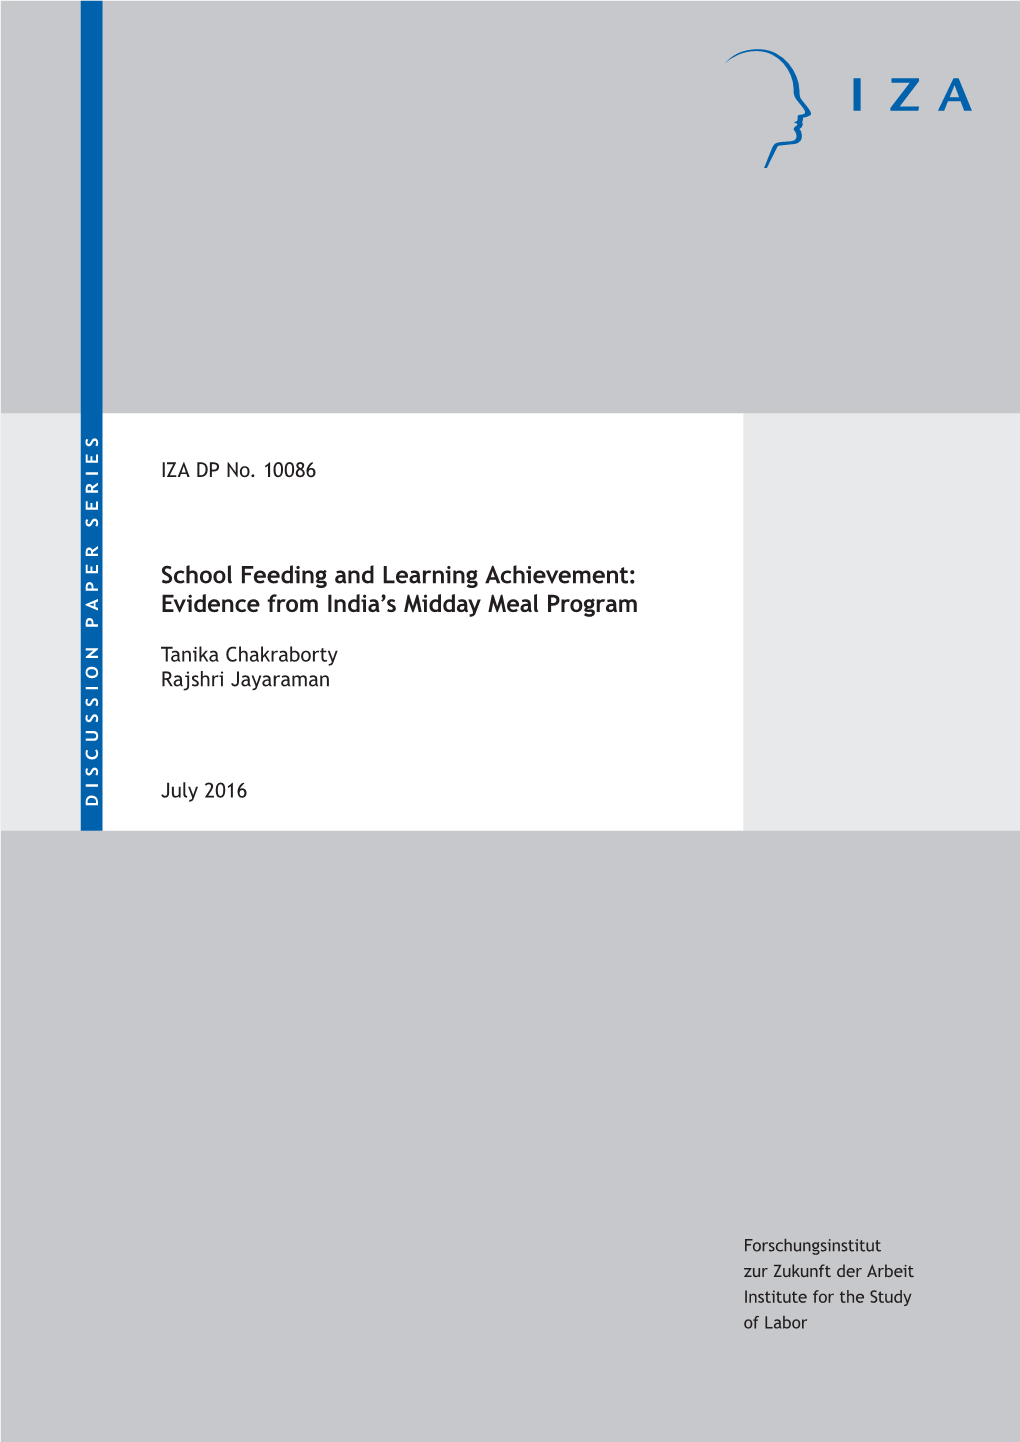 School Feeding and Learning Achievement: Evidence from India's